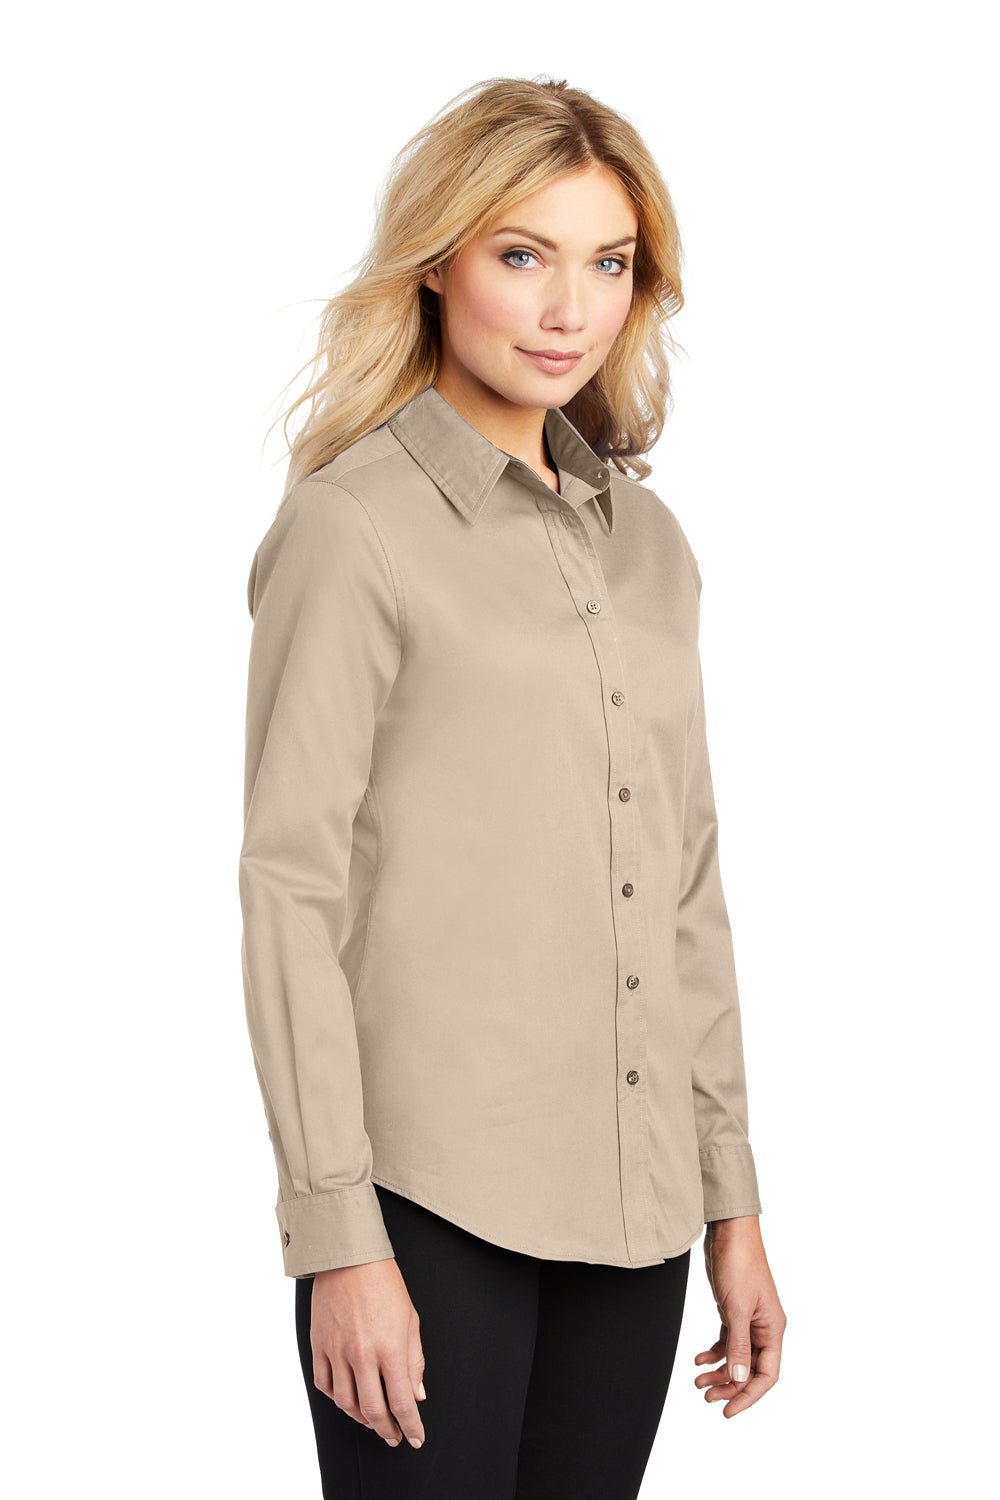 Port Authority L608 Womens Easy Care Wrinkle Resistant Long Sleeve Button Down Shirt Stone Brown 3Q